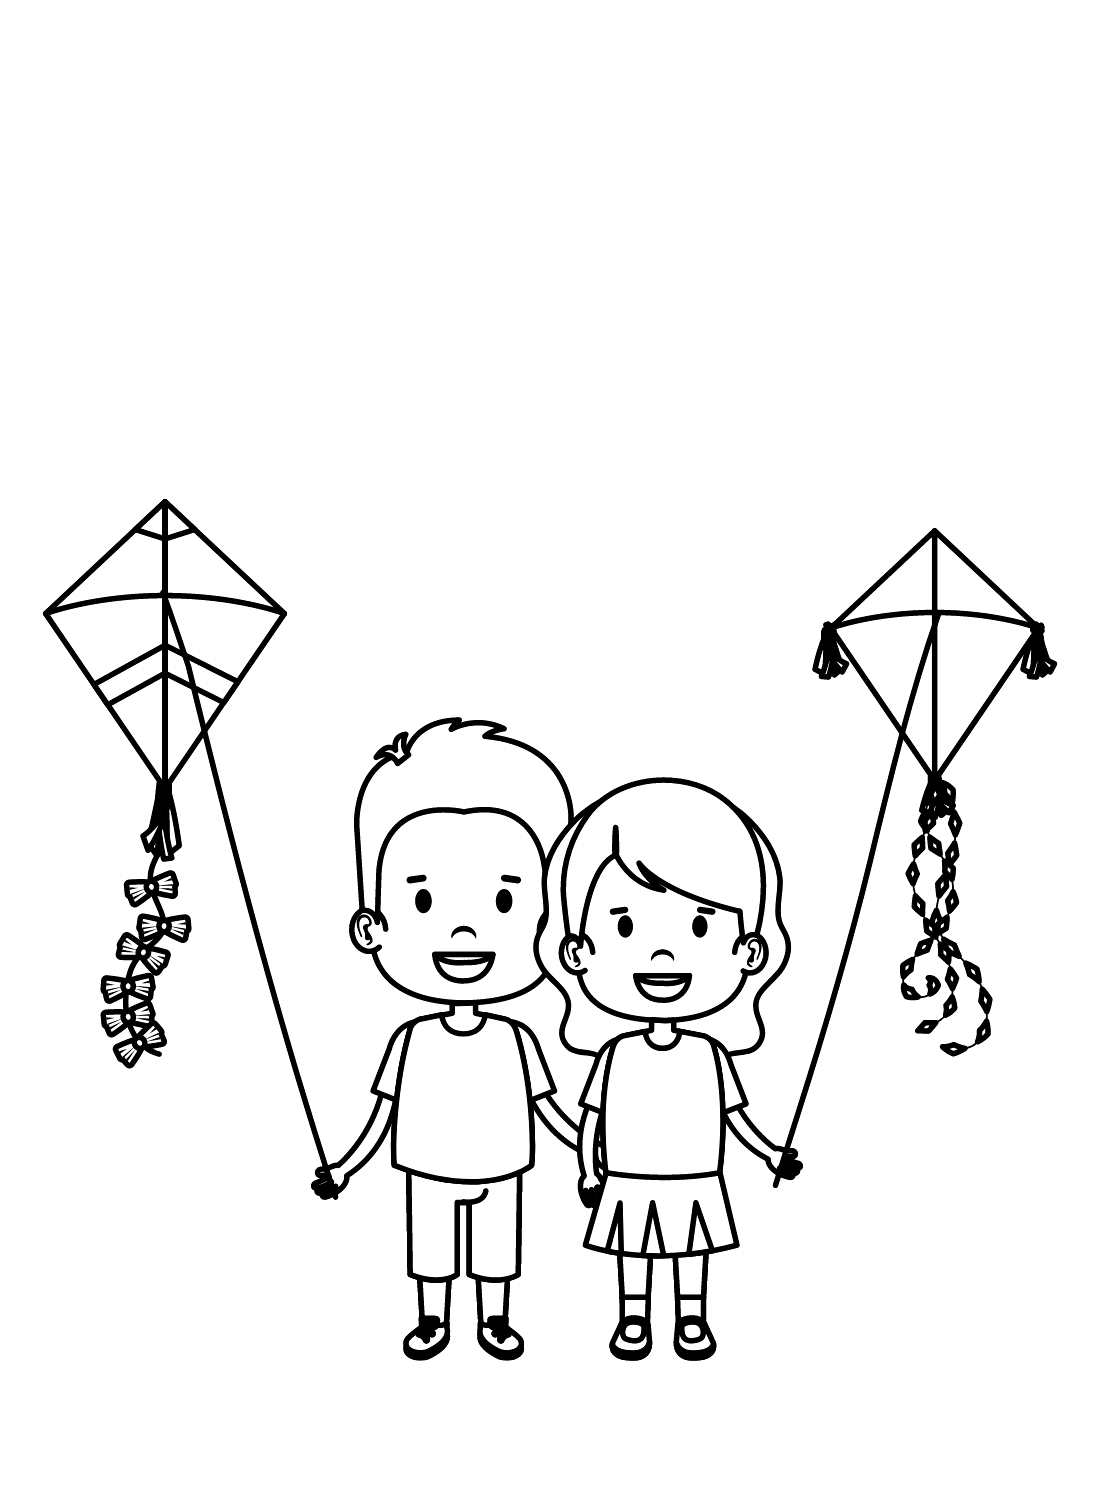 Boy and Girl Flying Kite Coloring Page